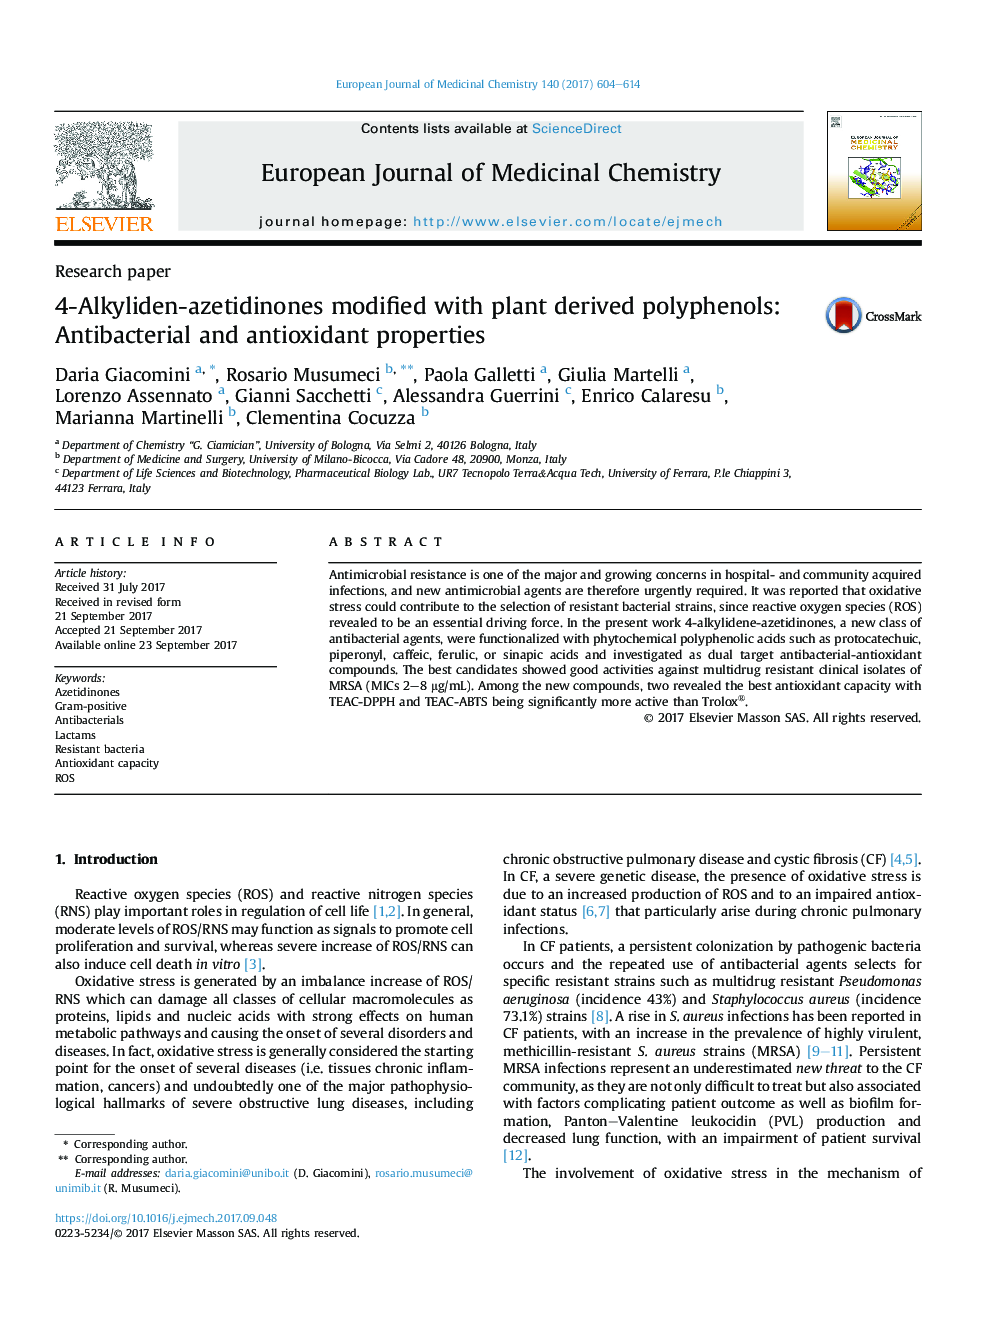 4-Alkyliden-azetidinones modified with plant derived polyphenols: Antibacterial and antioxidant properties